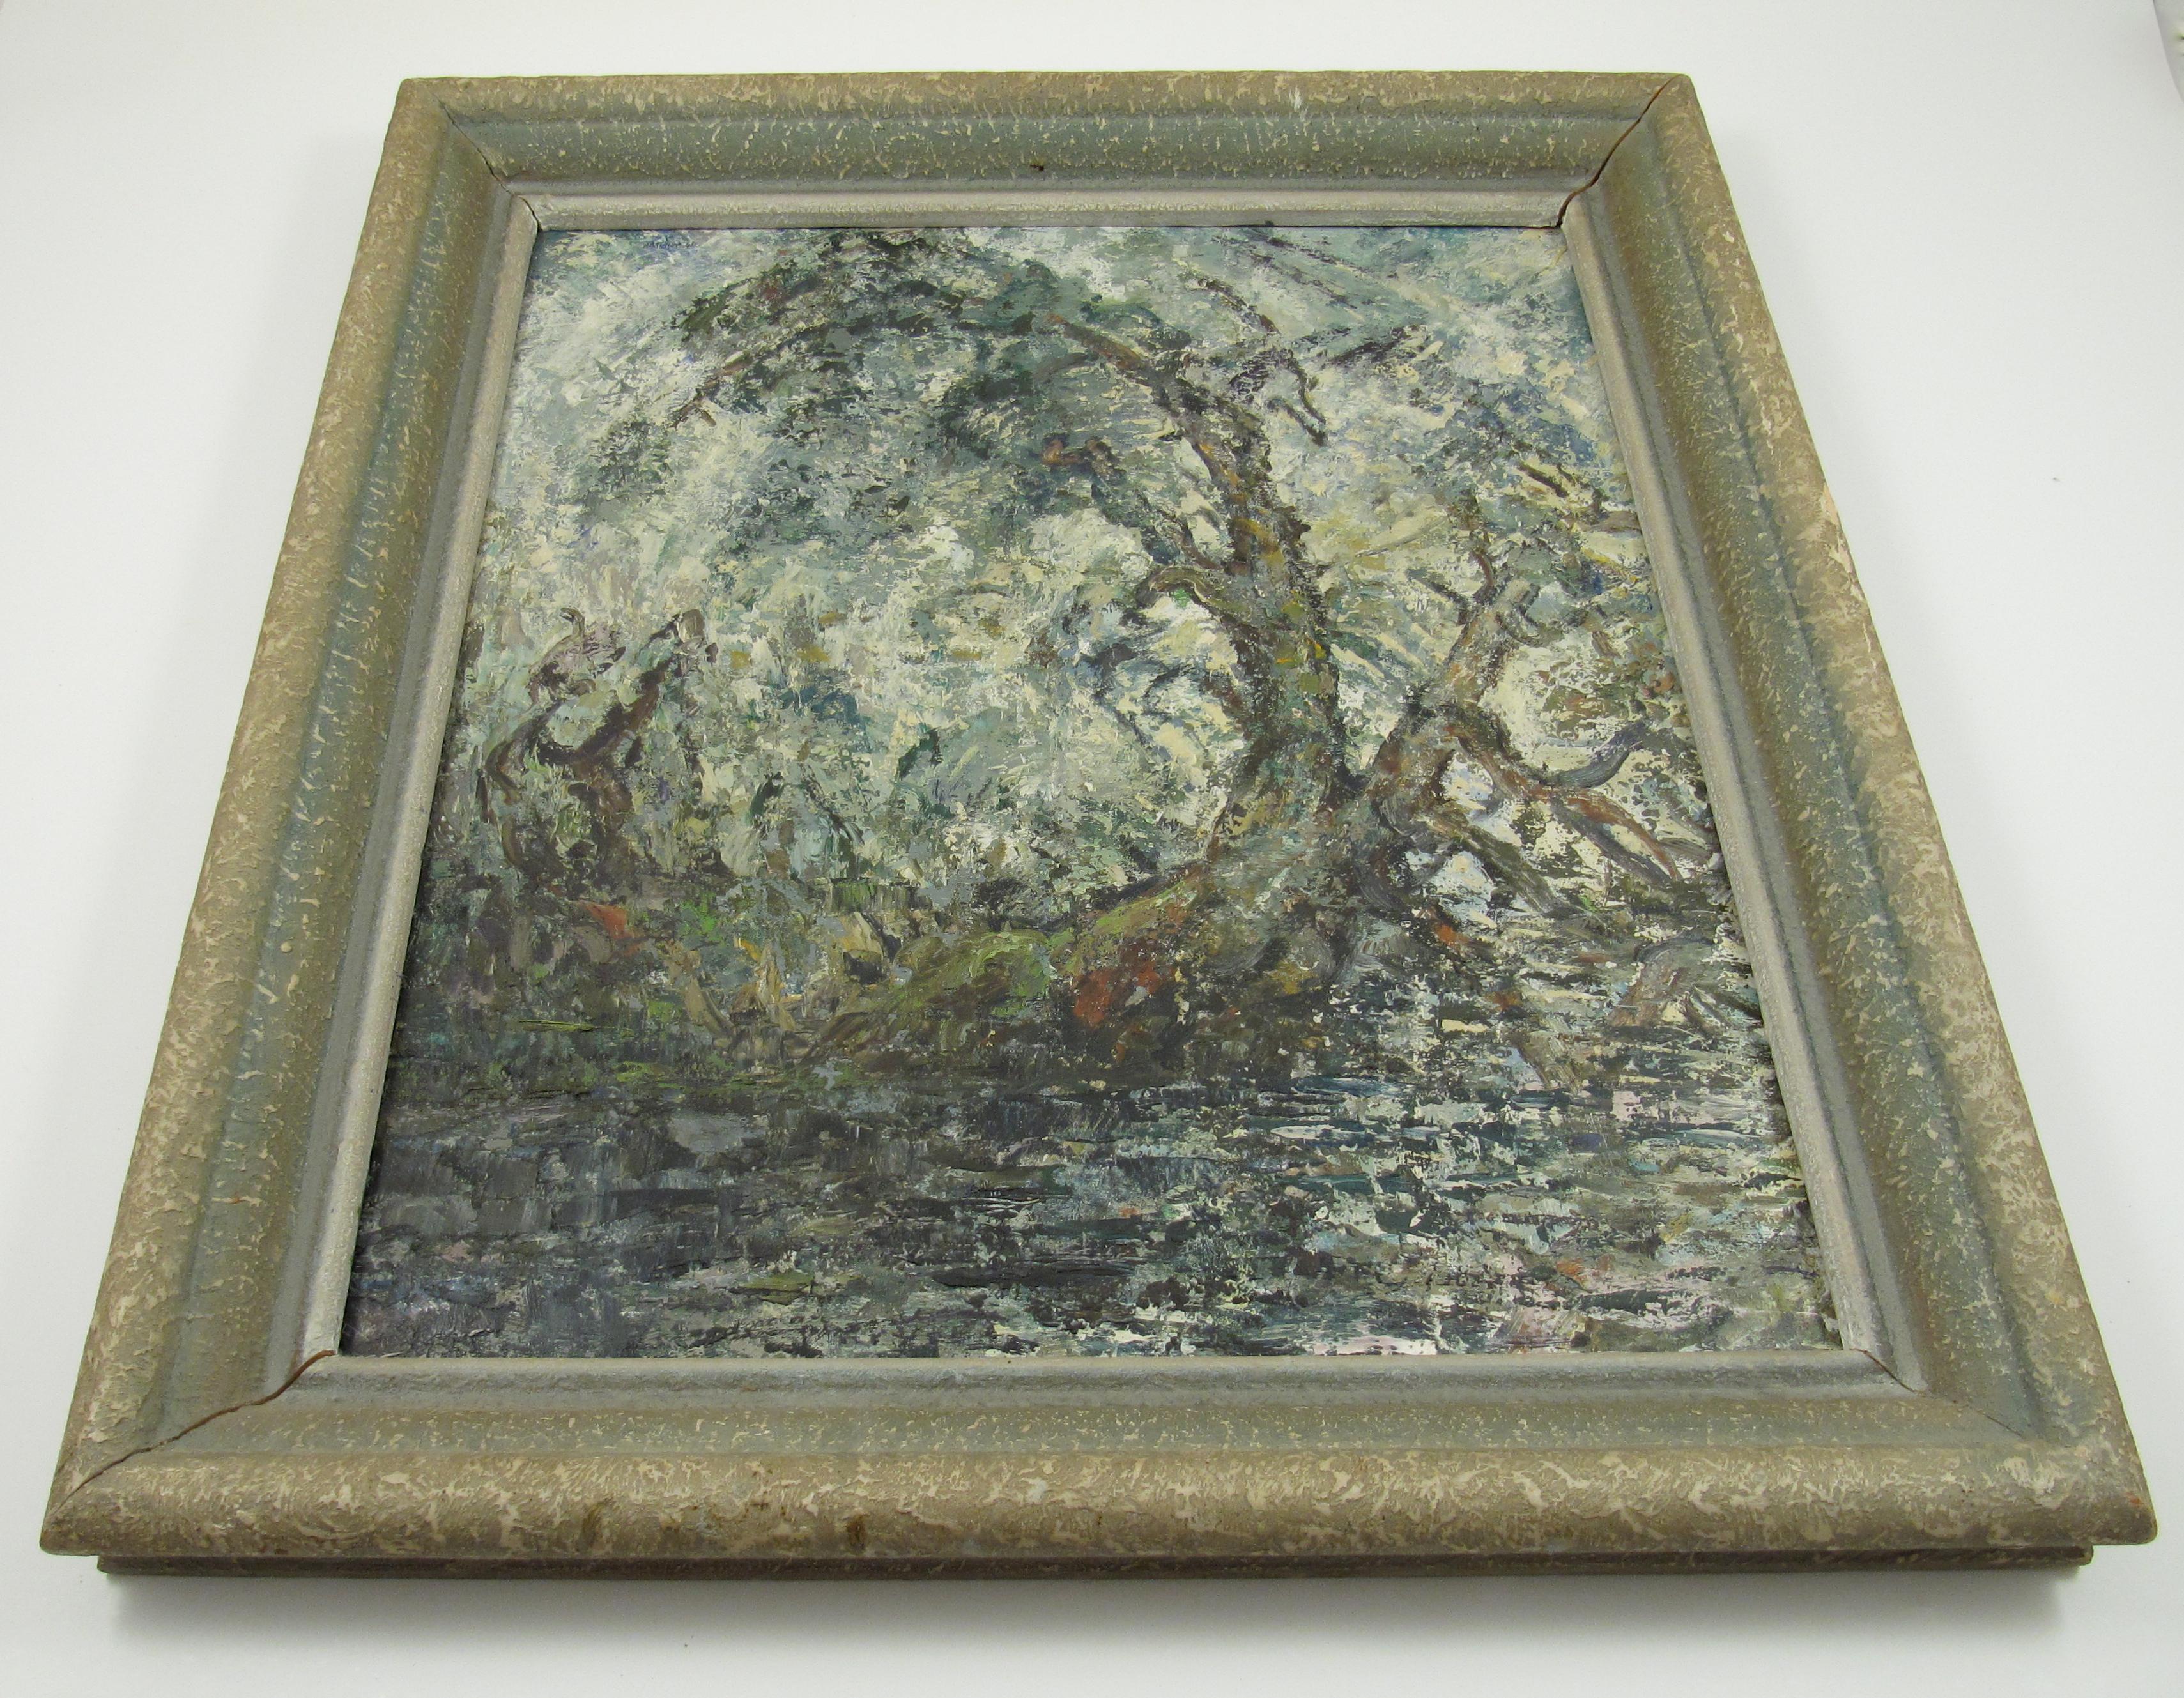 Alphons (Alfons) Müller
(Swiss, * 24.8.1898 Mitlödi, † 8.6.1955 Biel)

Wrath of the Wind

- Oil on artist board, ca. 58.5 x 50 cm
- Frame, ca. 71 x 62 cm
- Signed and dated (19)40 top left

Worldwide shipping for this object is complimentary - There